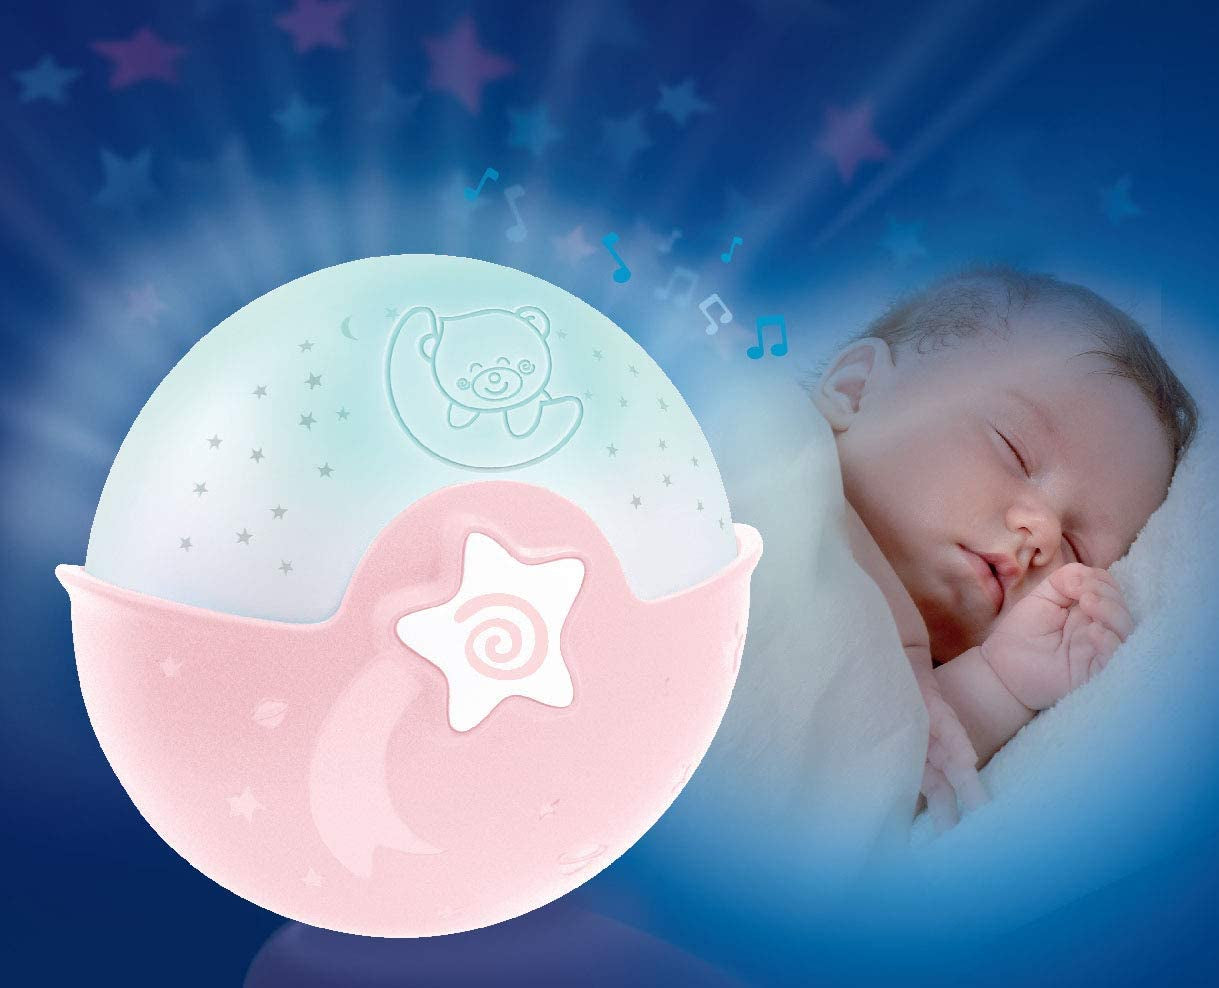 Infantino Soothing Light and Projector - Clip-on crib night light with grow-with-me design, starry night projector and tabletop light with built-in melodies and sound sensors, in pink